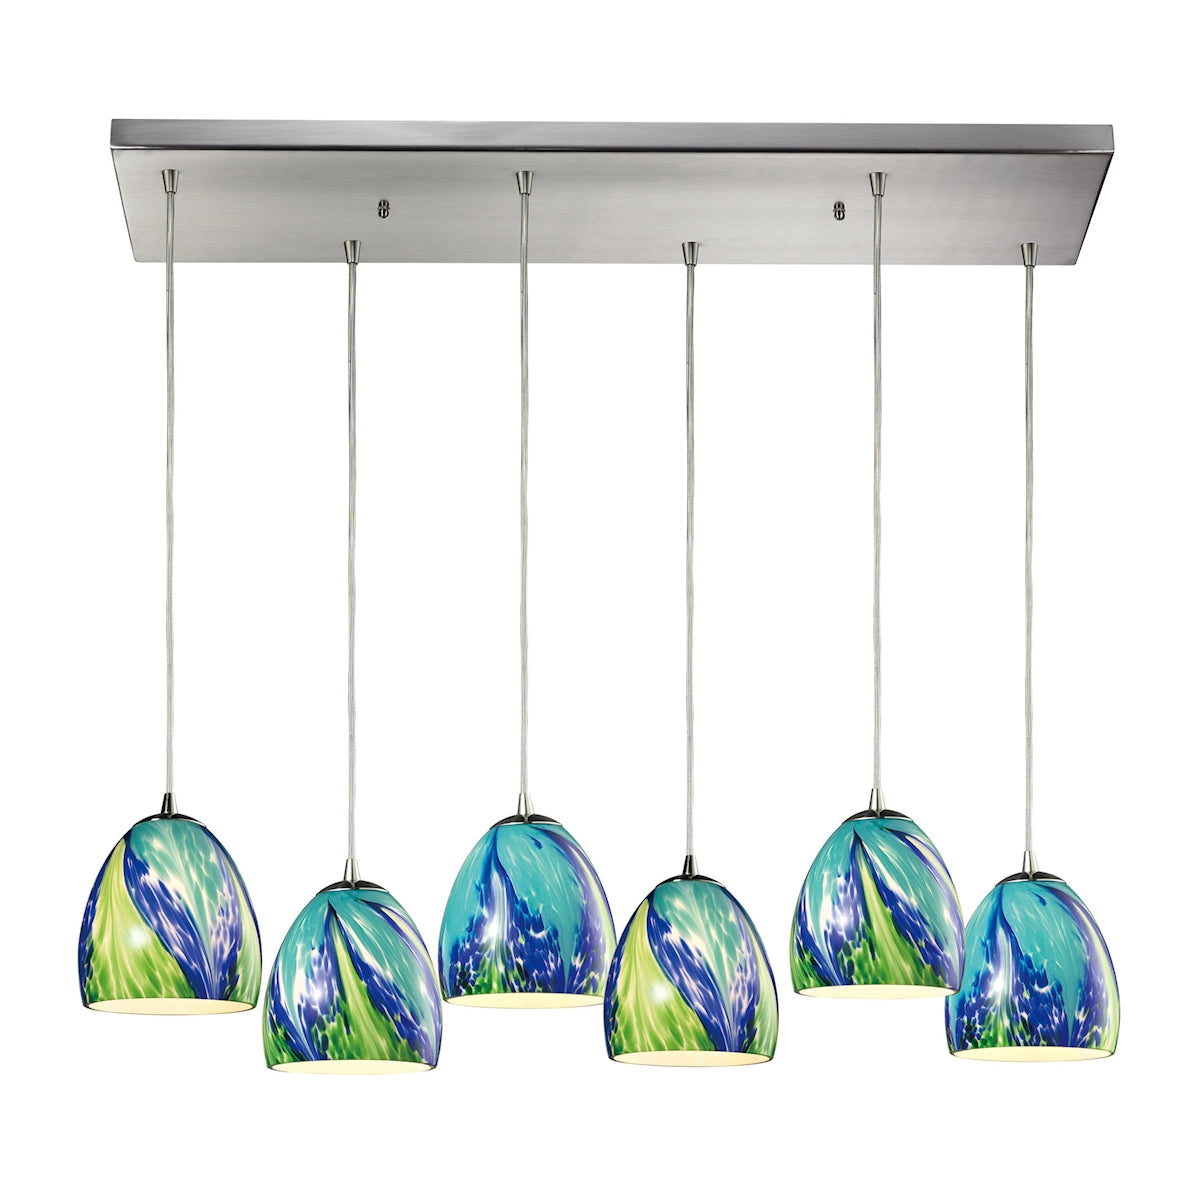 ELK Lighting 31445/6RC-TB Colorwave 6-Light Rectangular Pendant Fixture in Satin Nickel with Blue and Green Glass